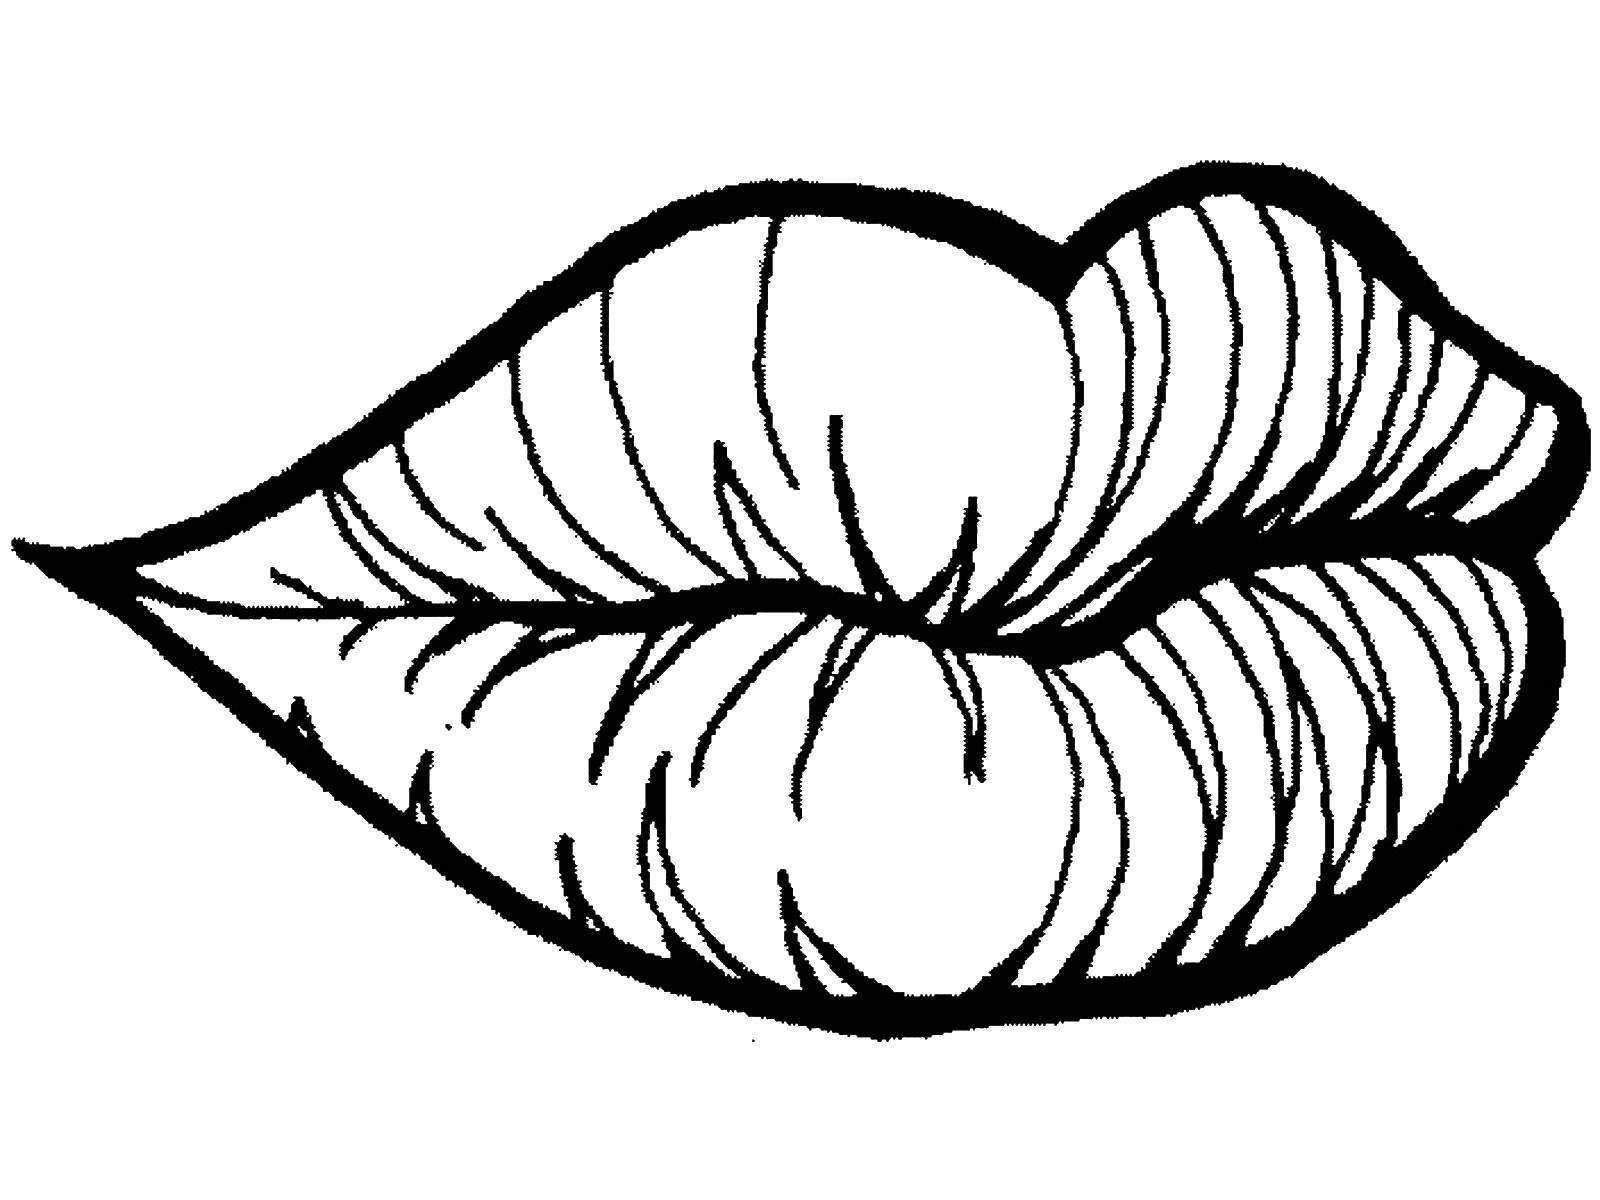 Coloring Lips. Category The structure of the body. Tags:  Lip.